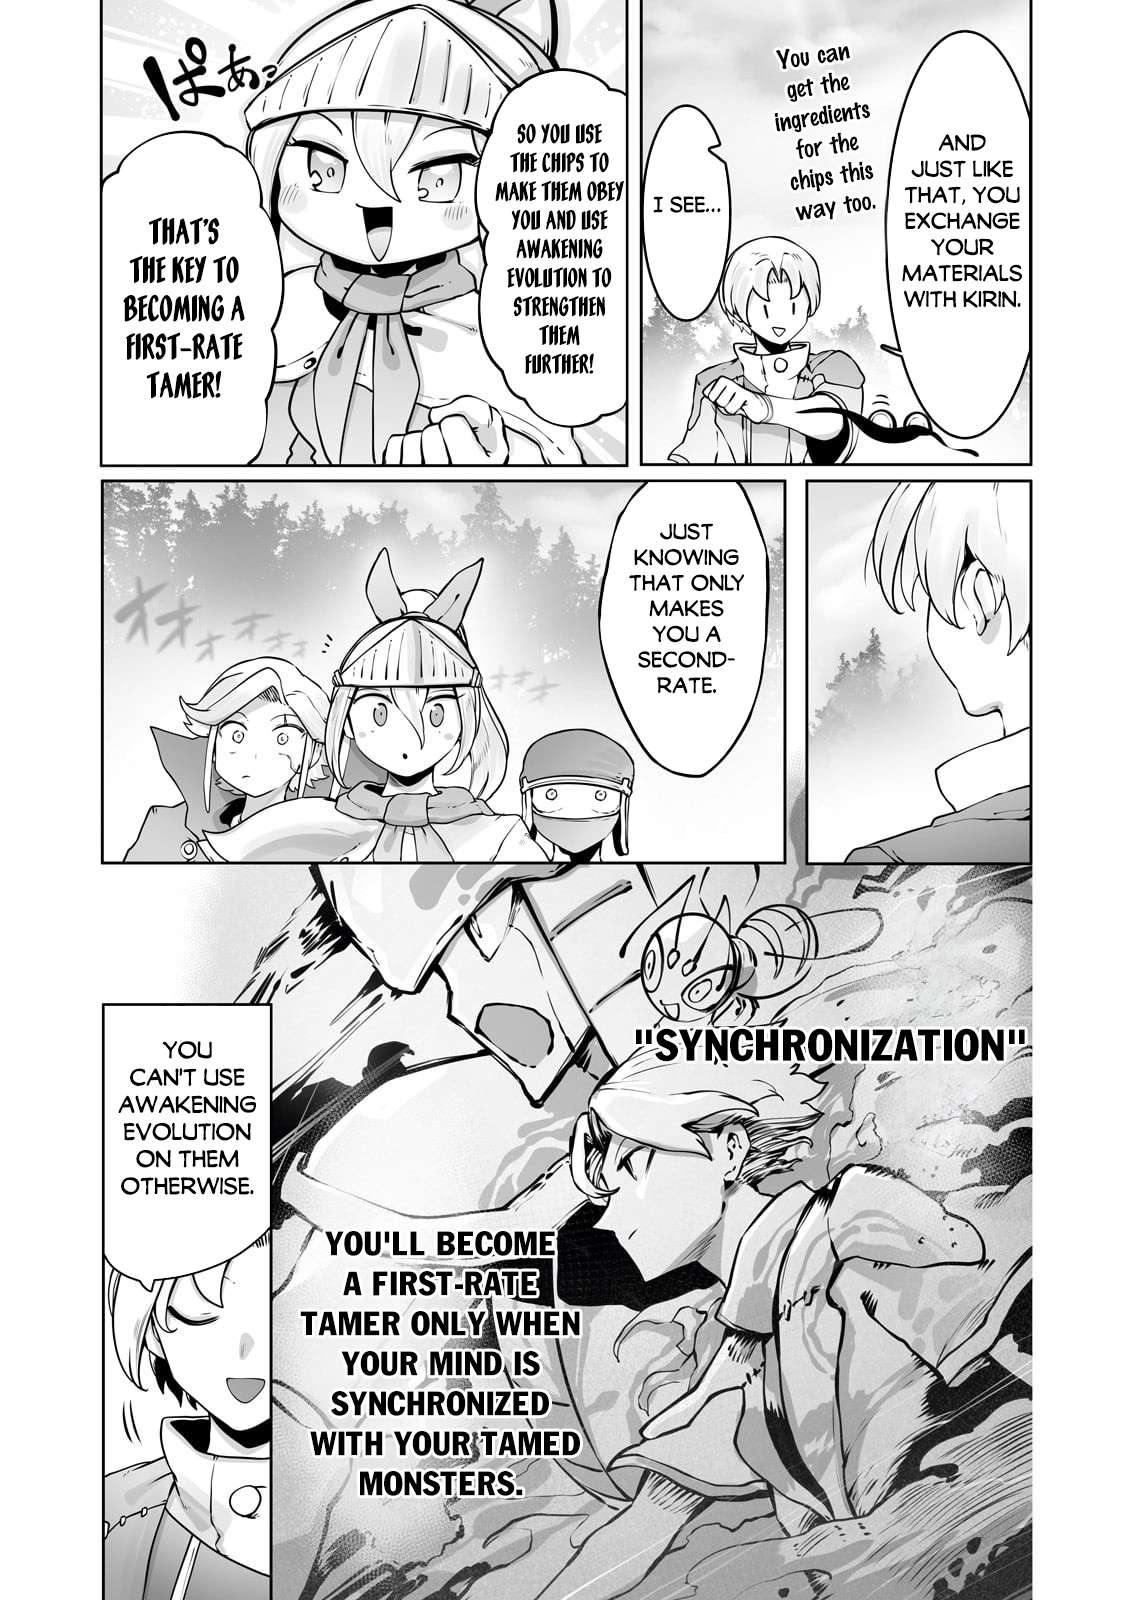 The Useless Tamer Will Turn into the Top Unconsciously by My Previous Life Knowledge - chapter 31 - #4